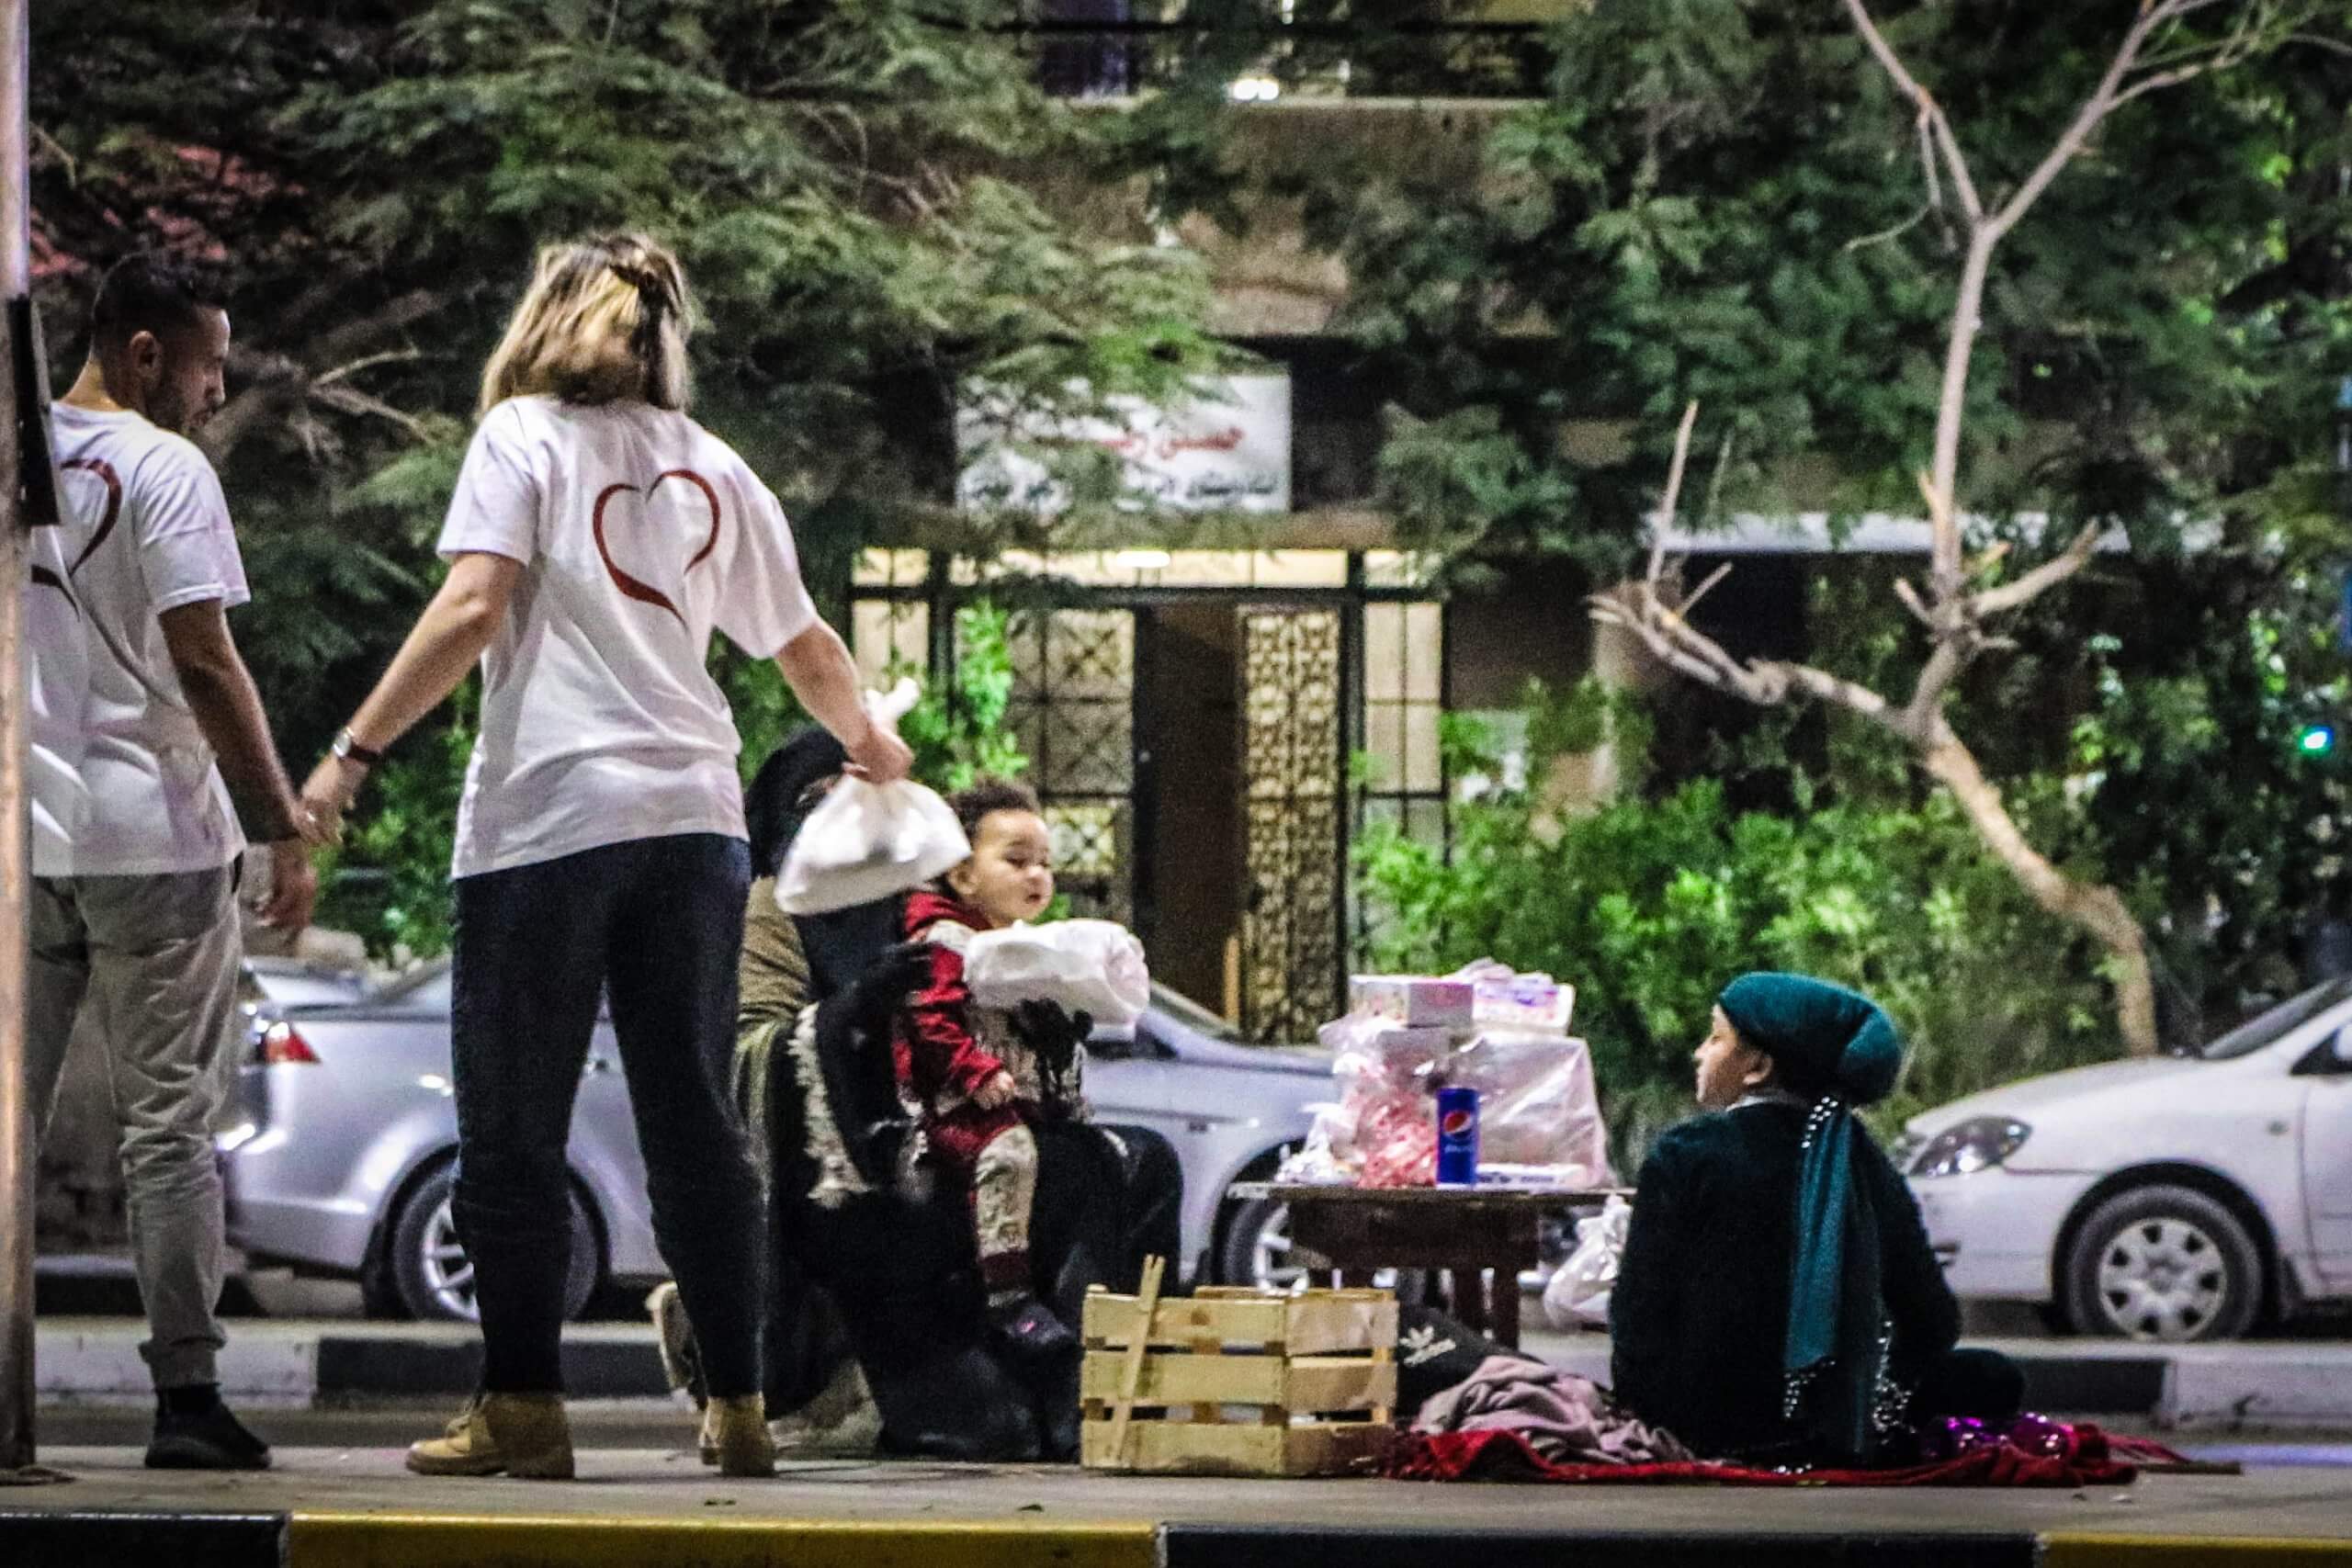 Volunteers start marauding in Alexandria and distribute 100 meals per night to the homeless